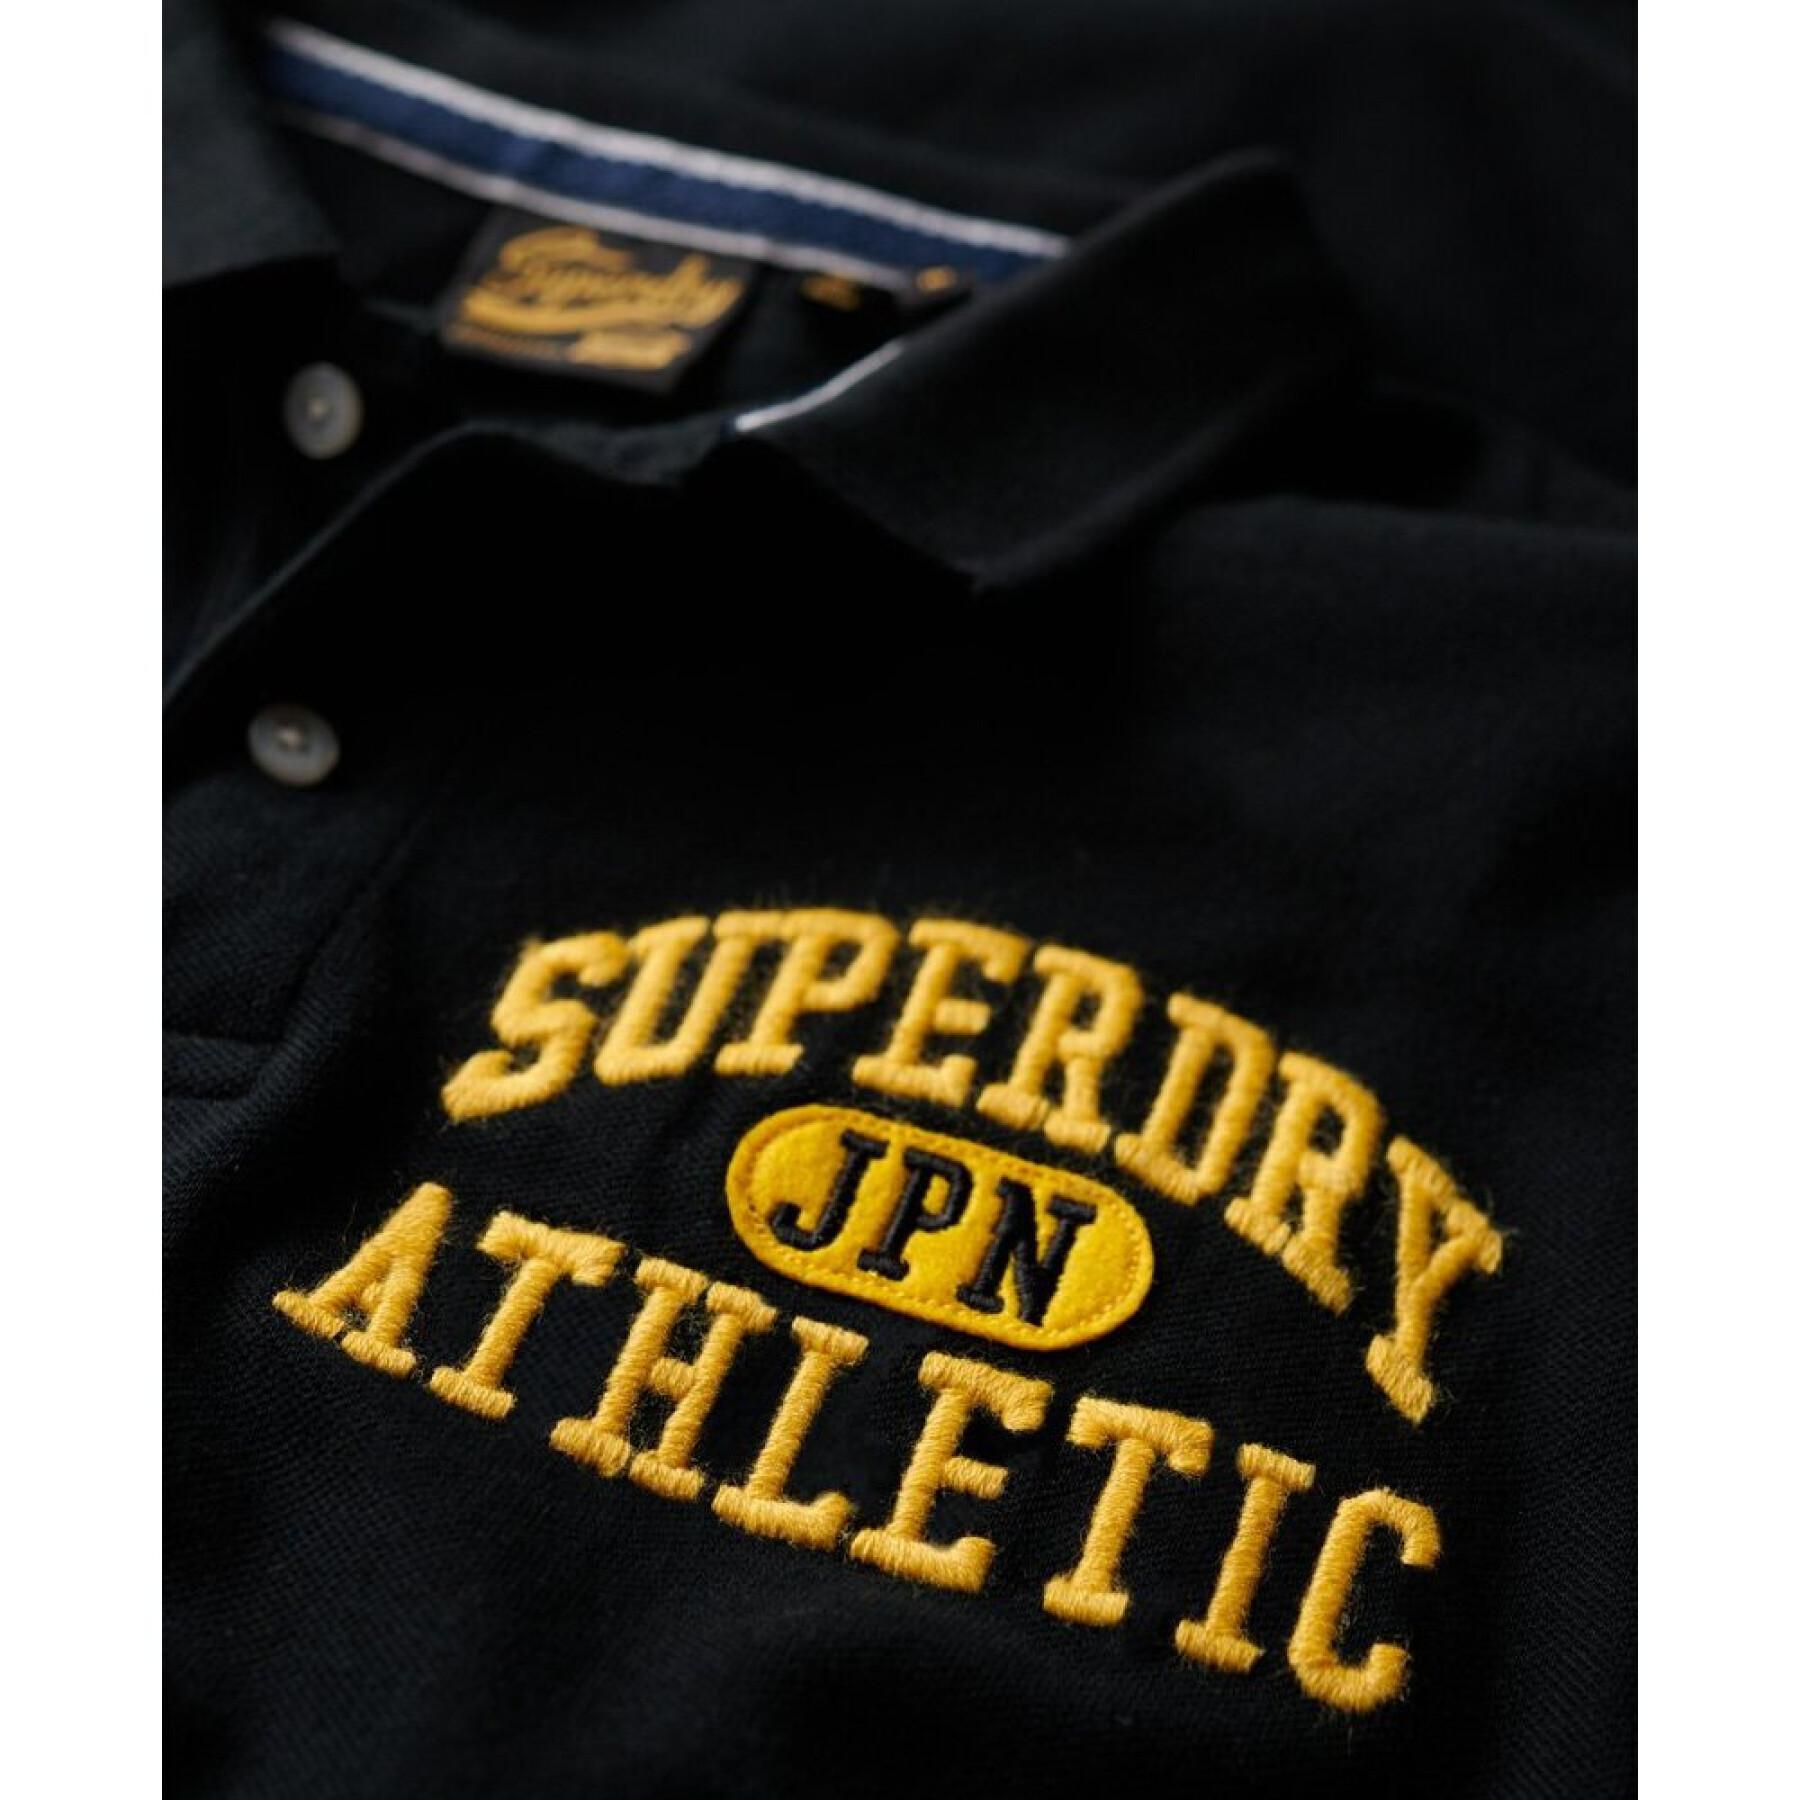 Polo-Shirt Superdry Superstate